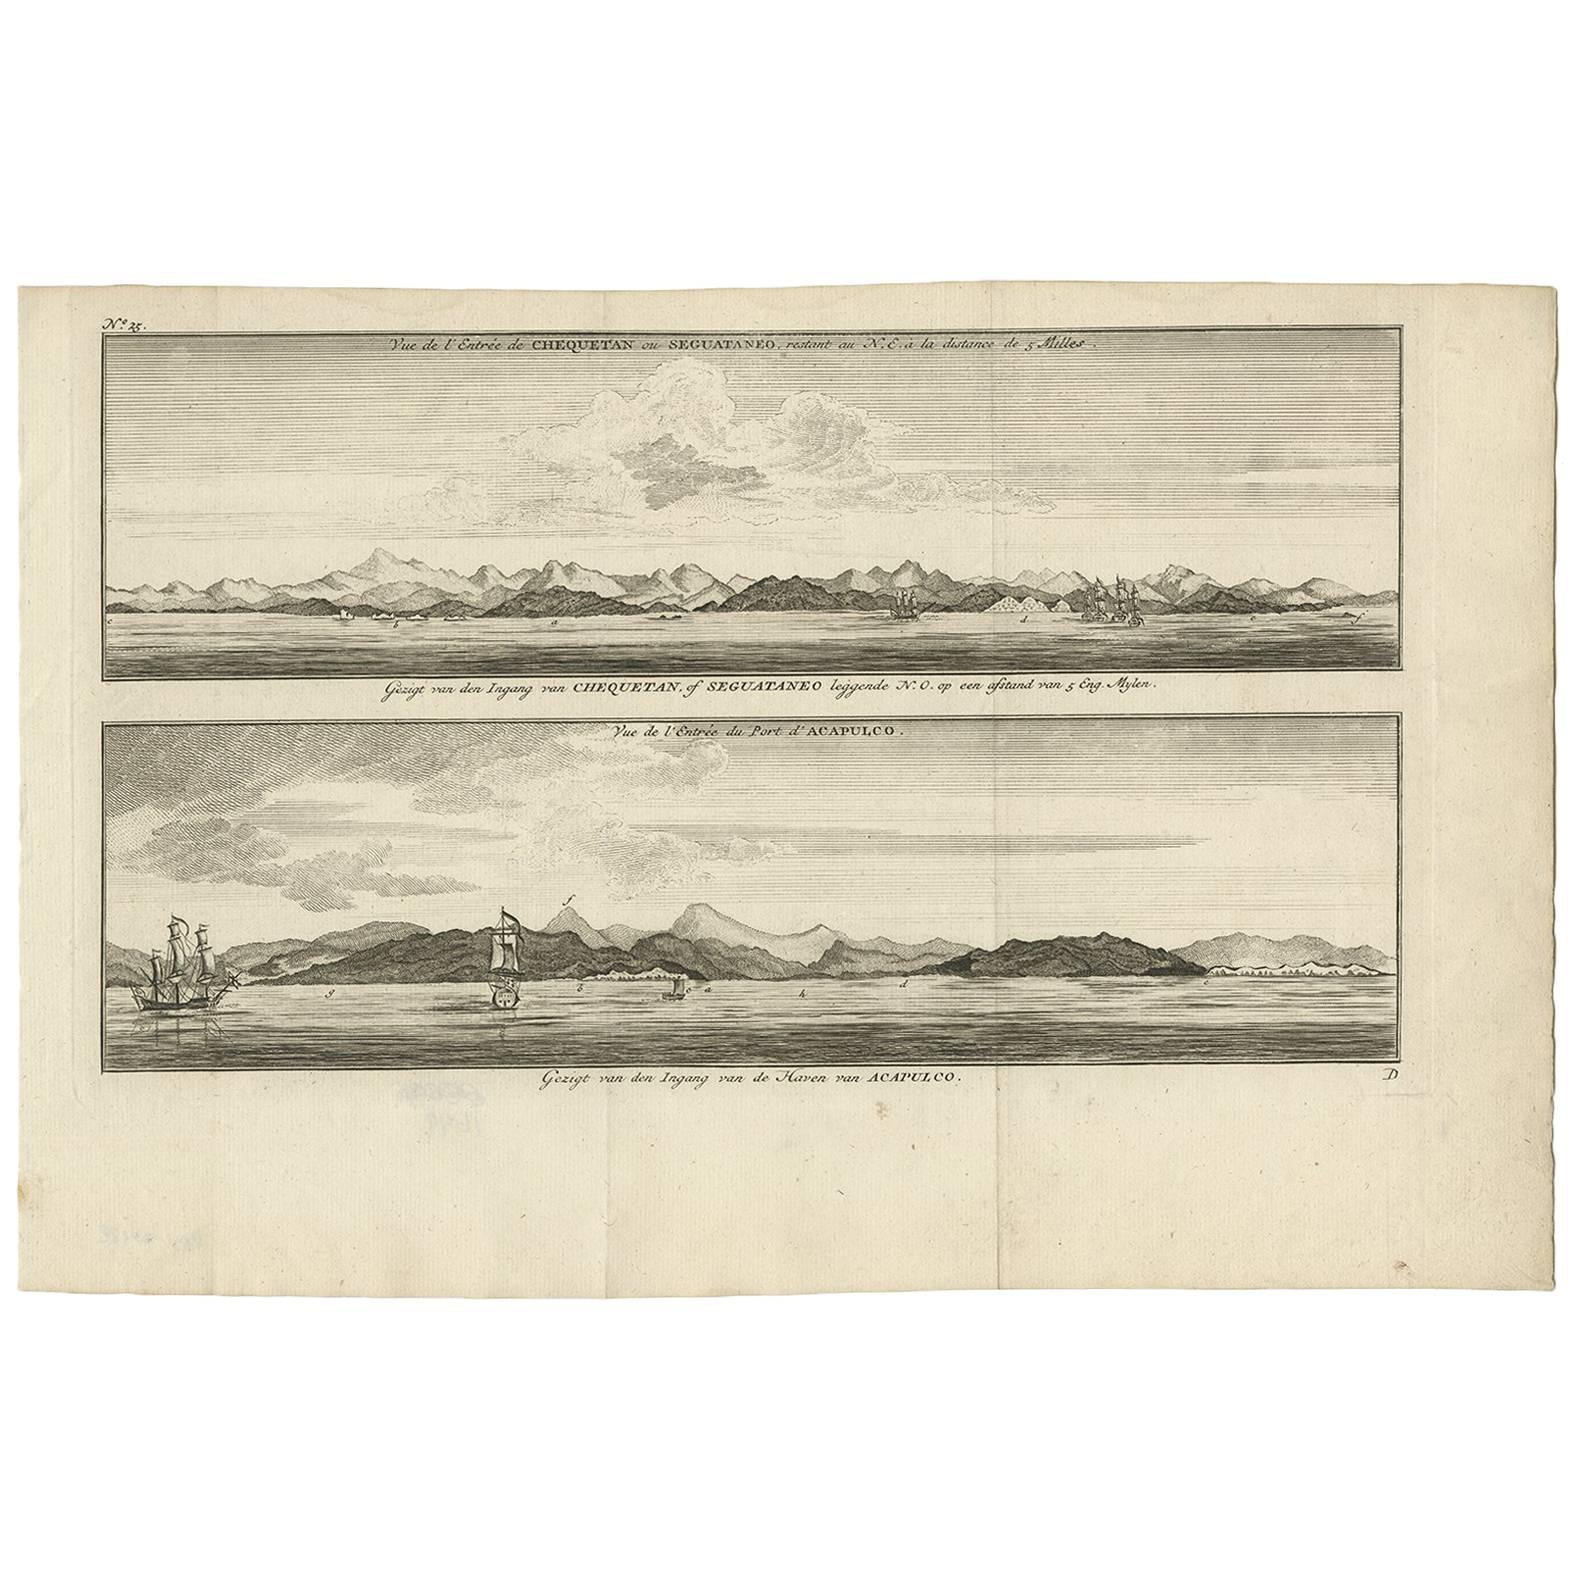 Antique Print of Zihuatanejo and the harbour of Acapulco by Anson (c.1760) For Sale